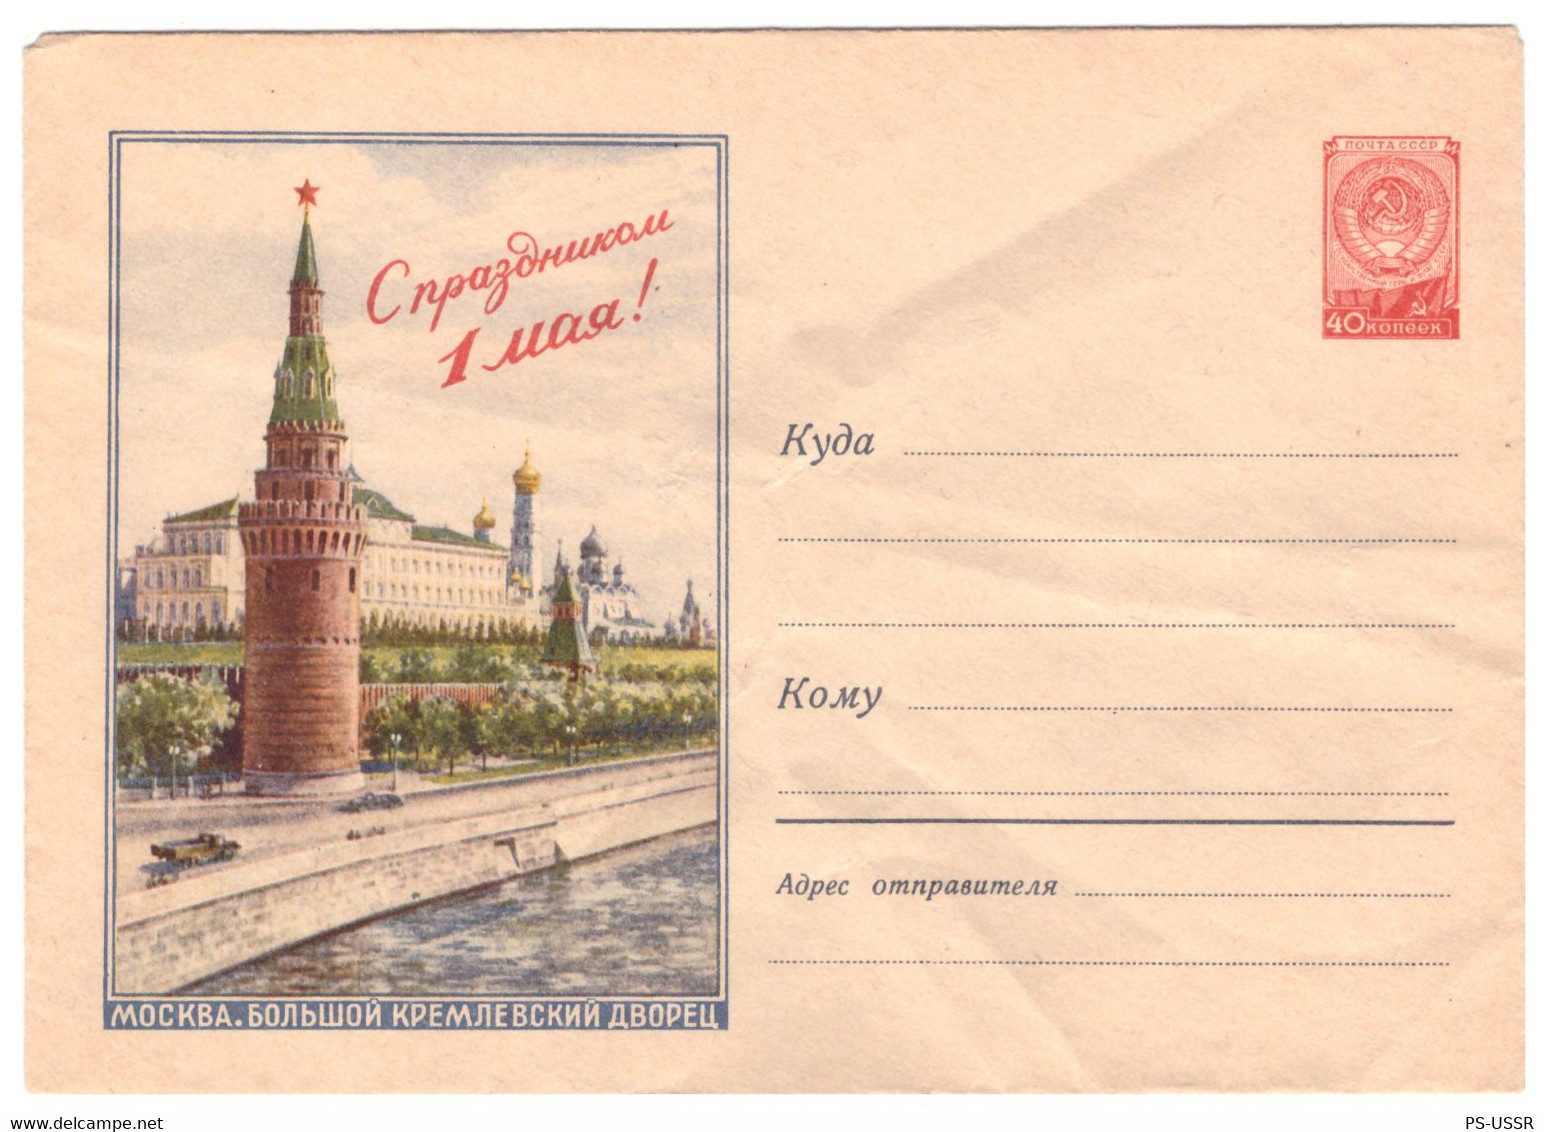 USSR 1959 HAPPY MAY 1 WORKERS' SPRING HOLIDAY MOSCOW KREMLIN PSE UNUSED COVER ILLUSTRATED STAMPED ENVELOPE GANZSACHE - 1950-59